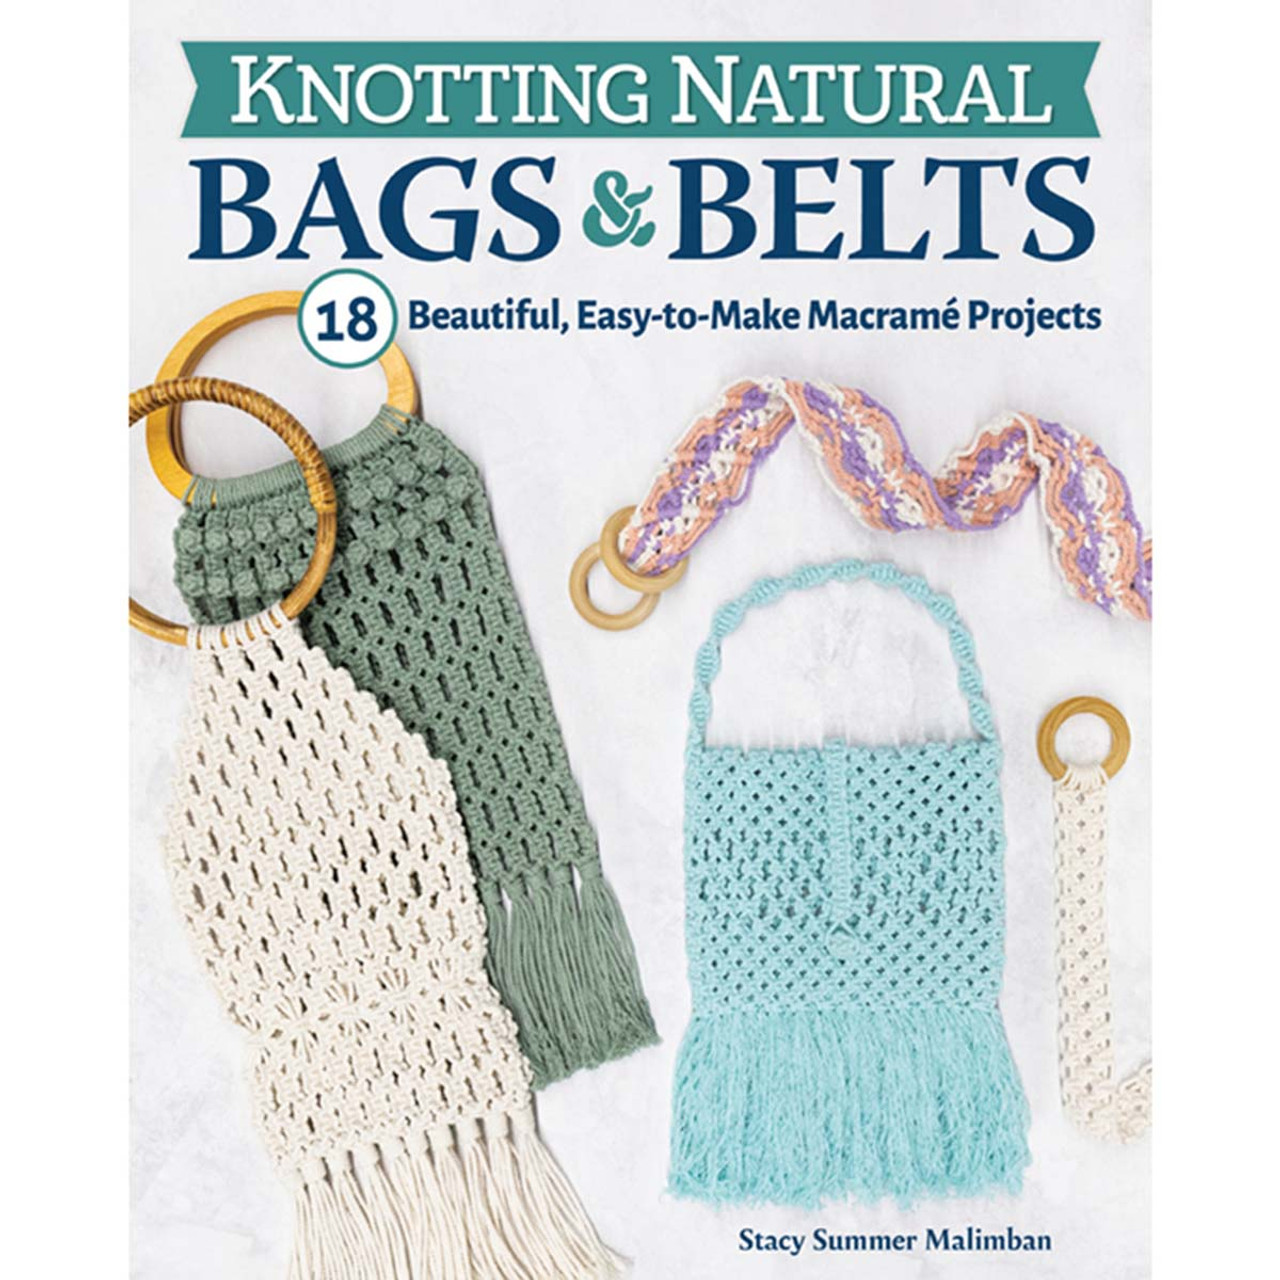 Knotting Natural Bags and Belts: 18 Macramé Projects to Accessorize Your Everyday Wardrobe [Book]